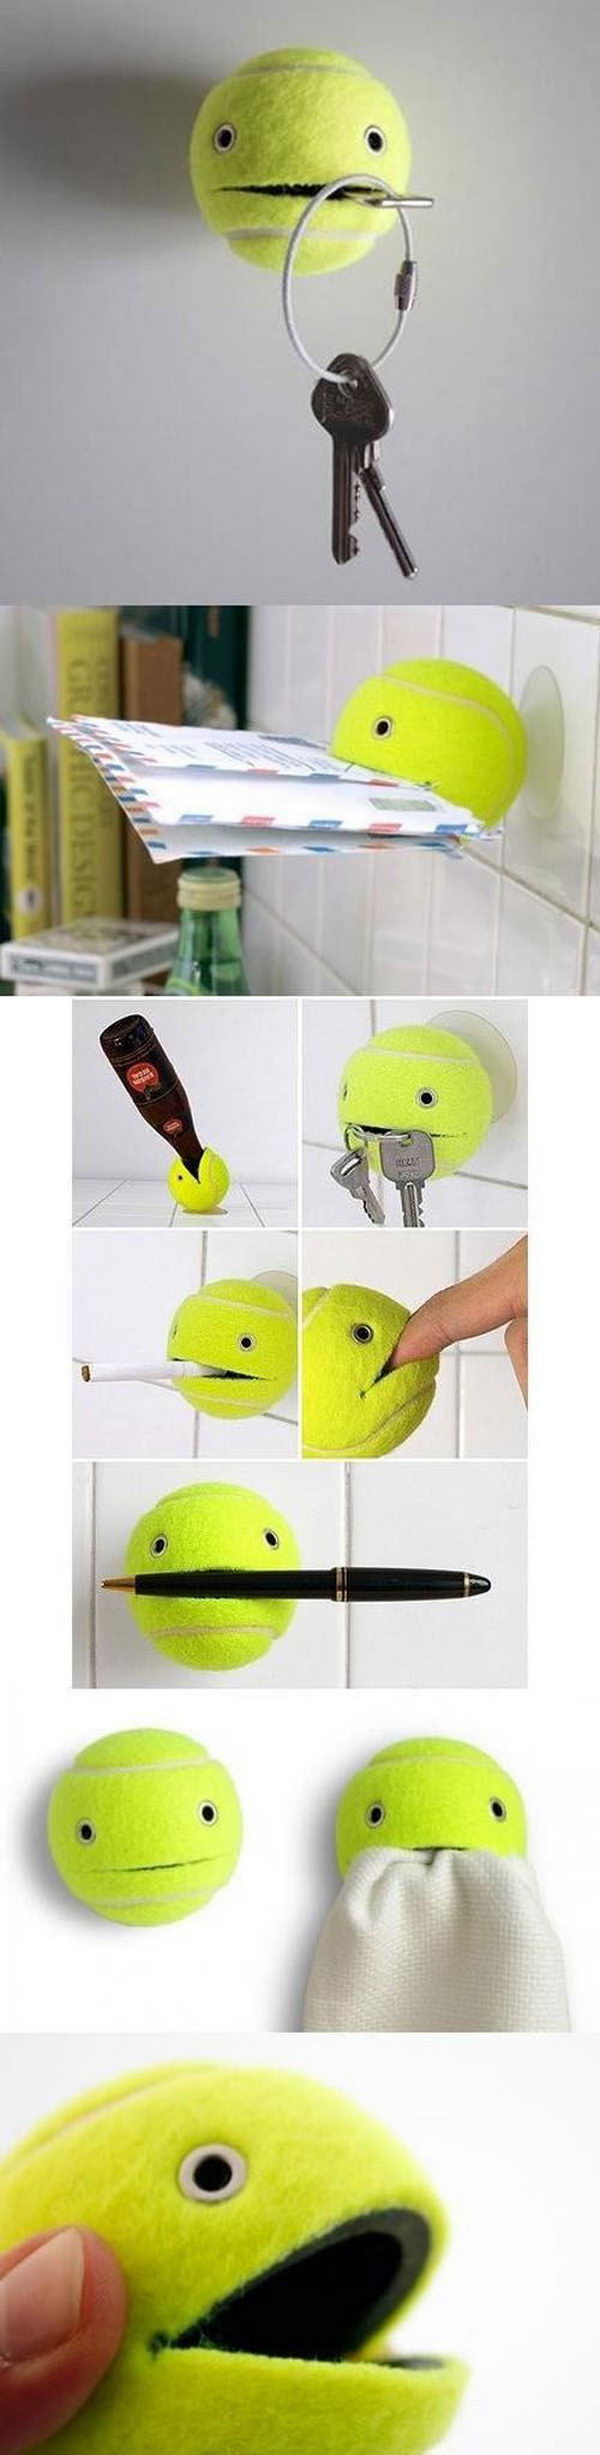 Tennis ball as a key holder. A brilliant idea to make a functional, fun and adorable key holder with a tennis ball. See the tutorial 